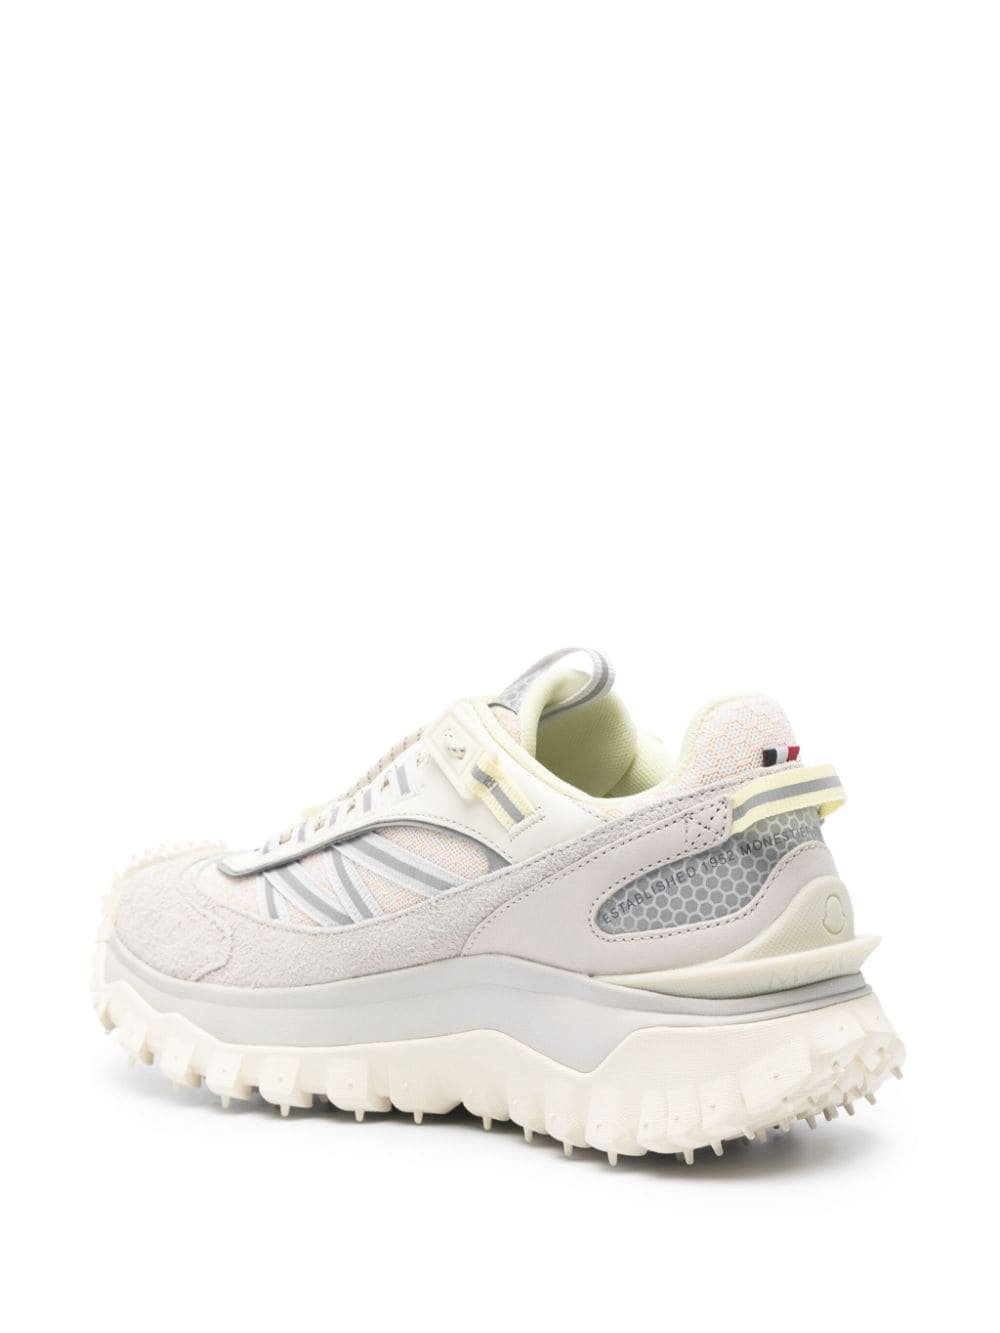 Pale Blue Low Top Sneakers for Women with Moncler Brand Accents and Durable Construction